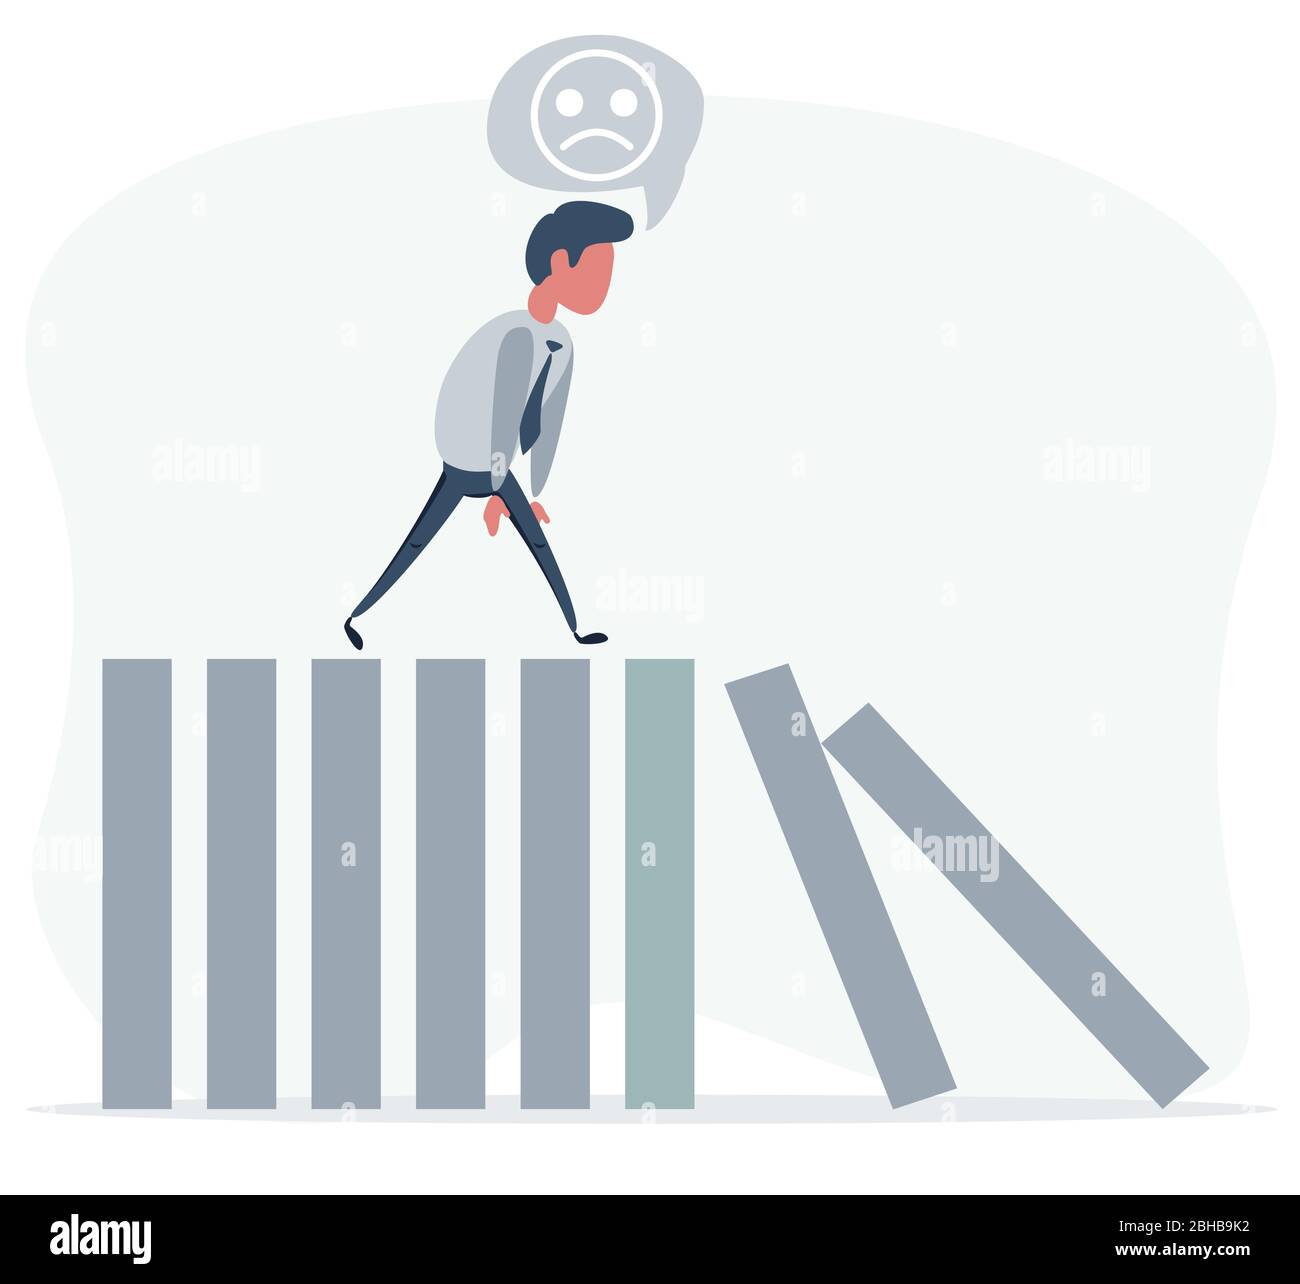 Man in a hopeless situation. Symbol of crisis, risk, management, leadership and determination. vector illustration. Stock Vector